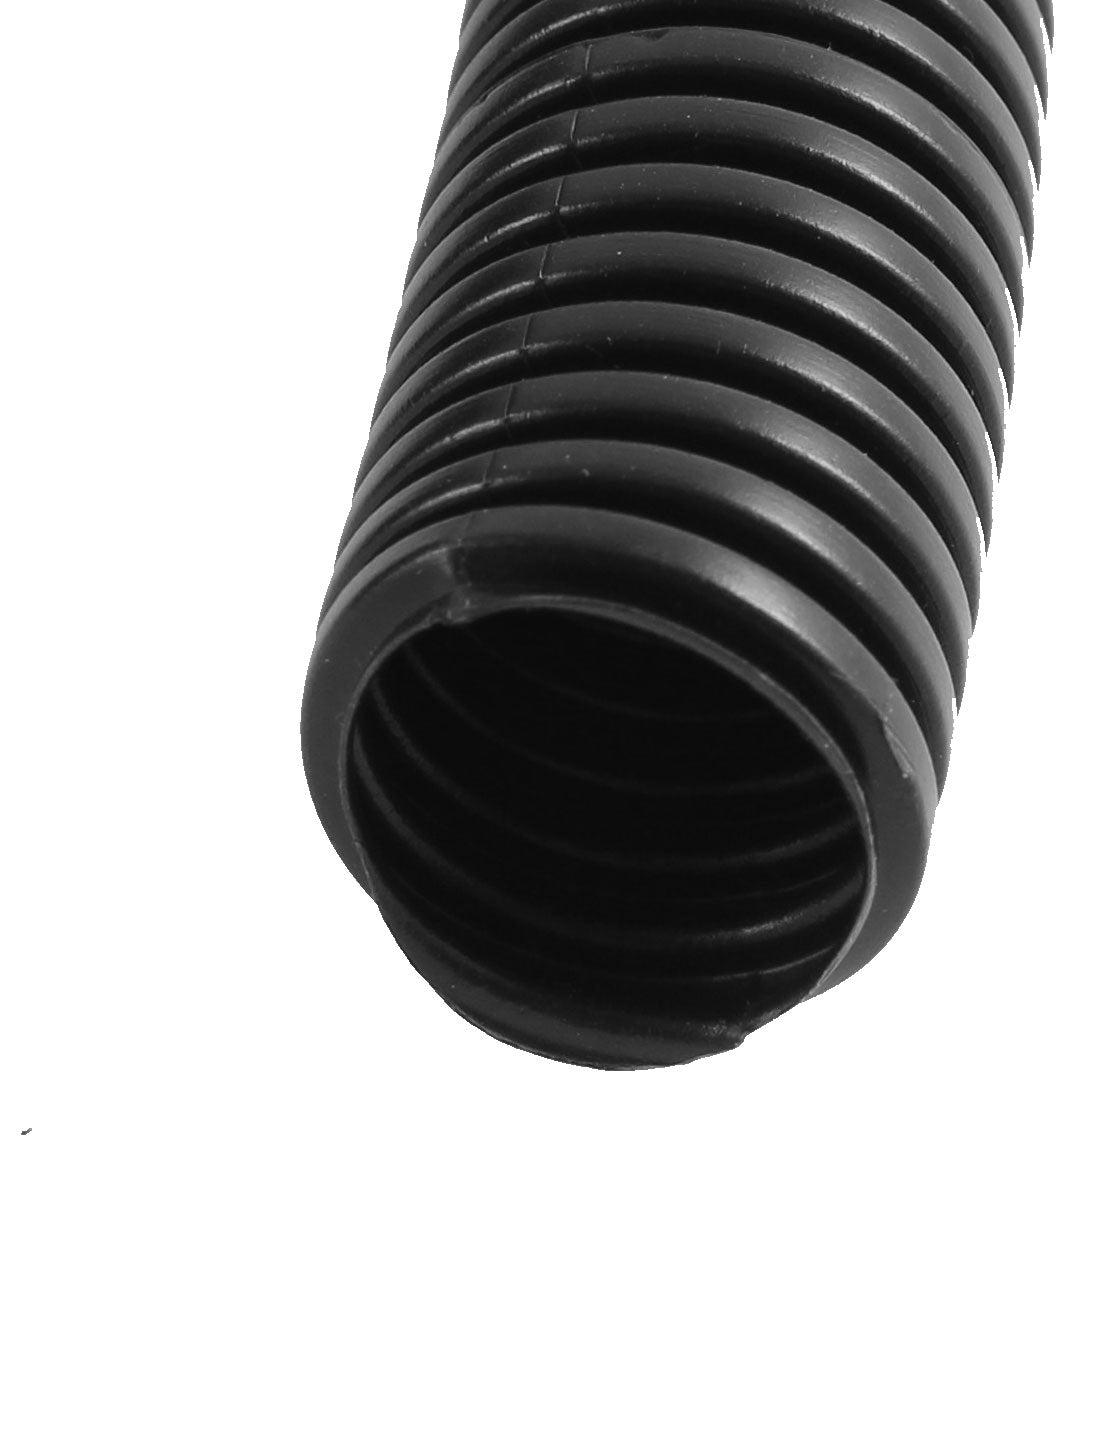 uxcell Uxcell 8 M 17.2 x 21.2 mm Plastic Corrugated Conduit Tube for Garden,Office Black